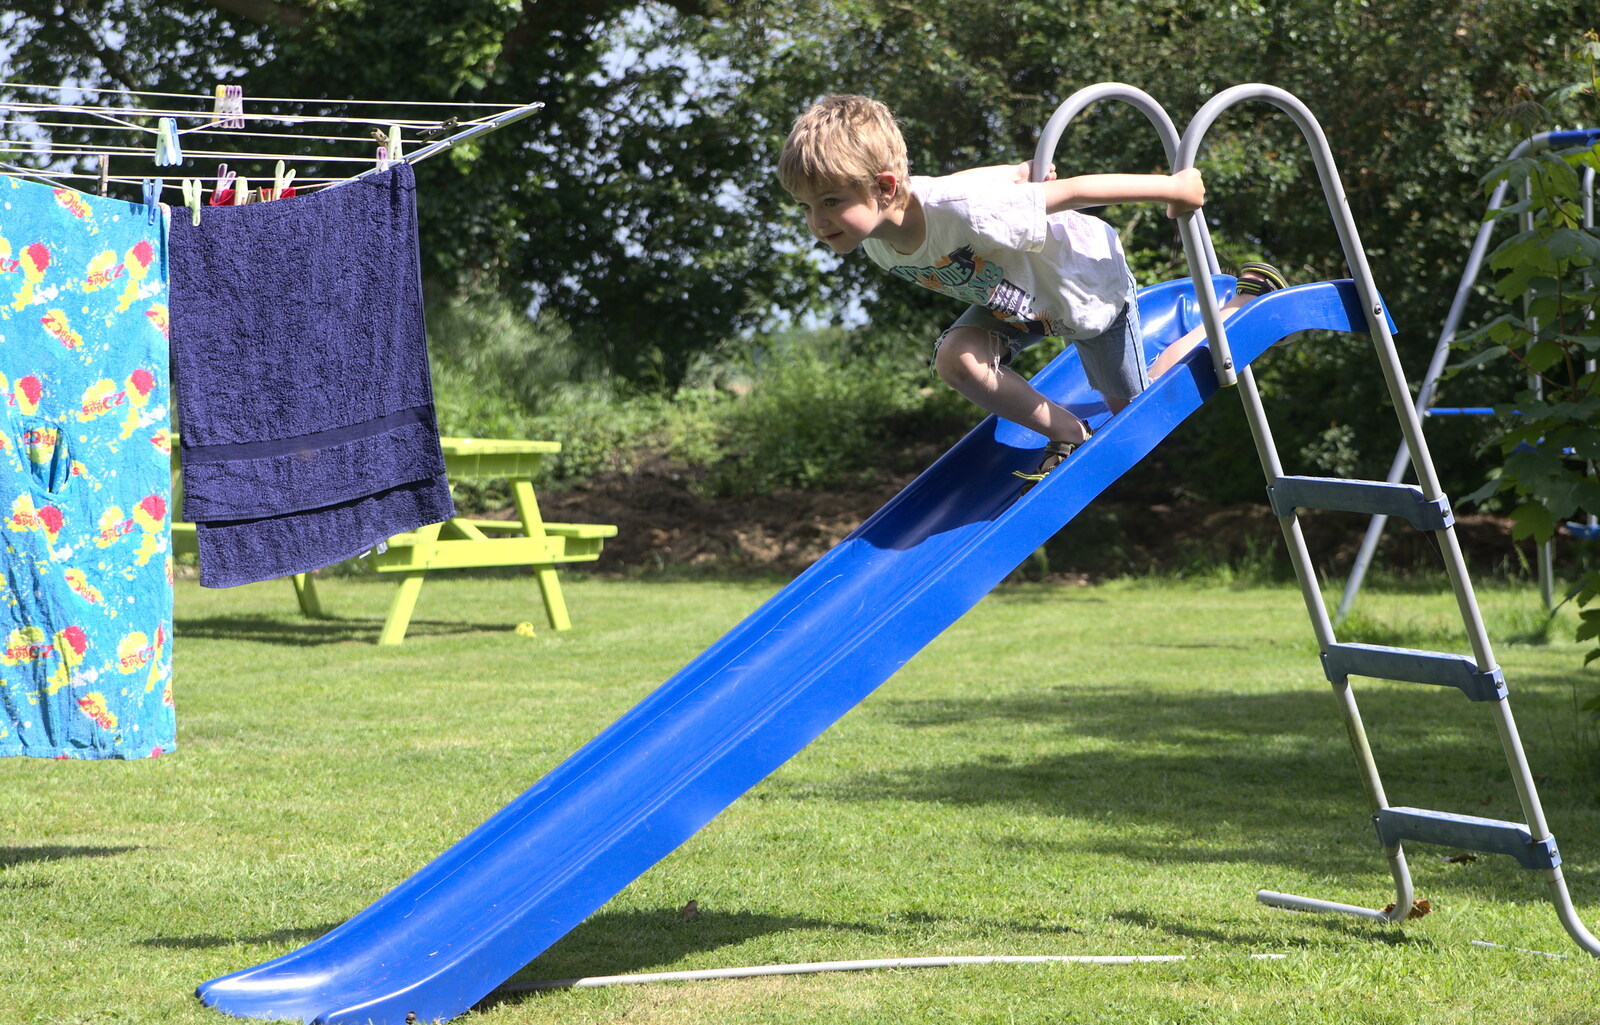 Fred hurls himself off a slide from A "Not a Birthday Party" Barbeque, Brome, Suffolk - 25th May 2014